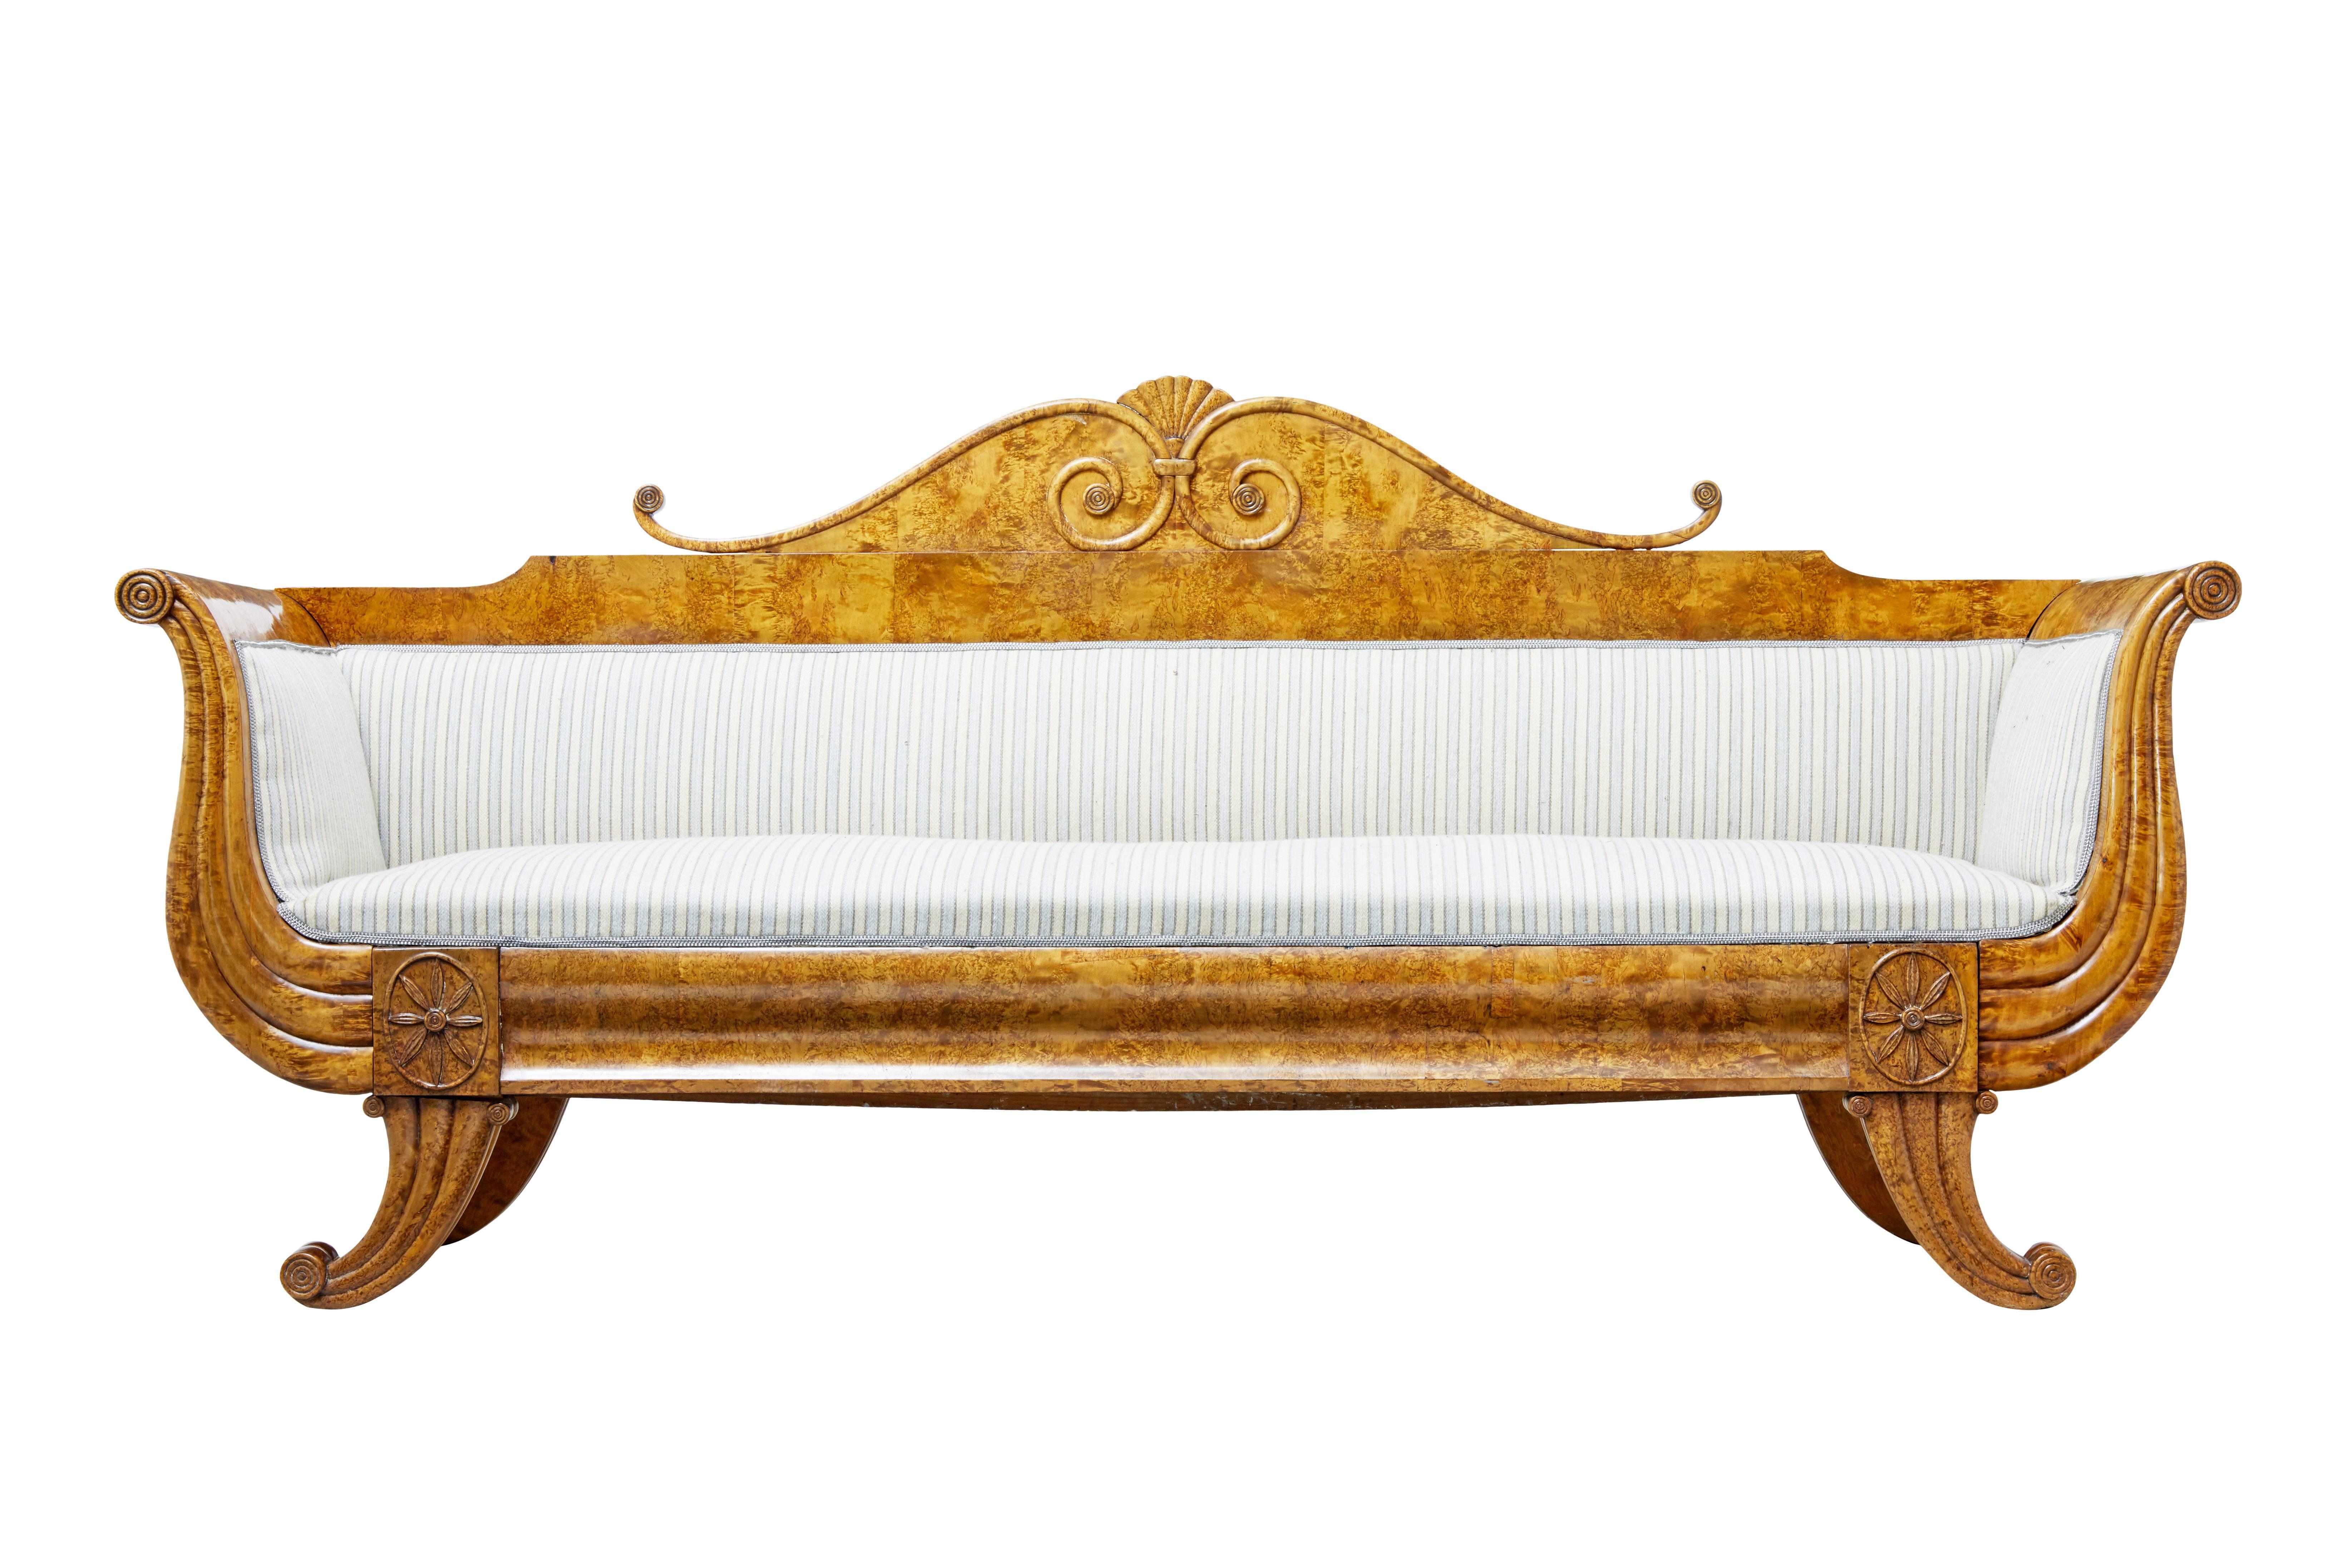 Beautiful Biedermeier sofa of grand proportions, circa 1840.

We have dealt in many of these types of sofa but at nearly 8 foot long, this is one of the grandest.

Made from stunning birch root, which gives it this rich color and striking grain.